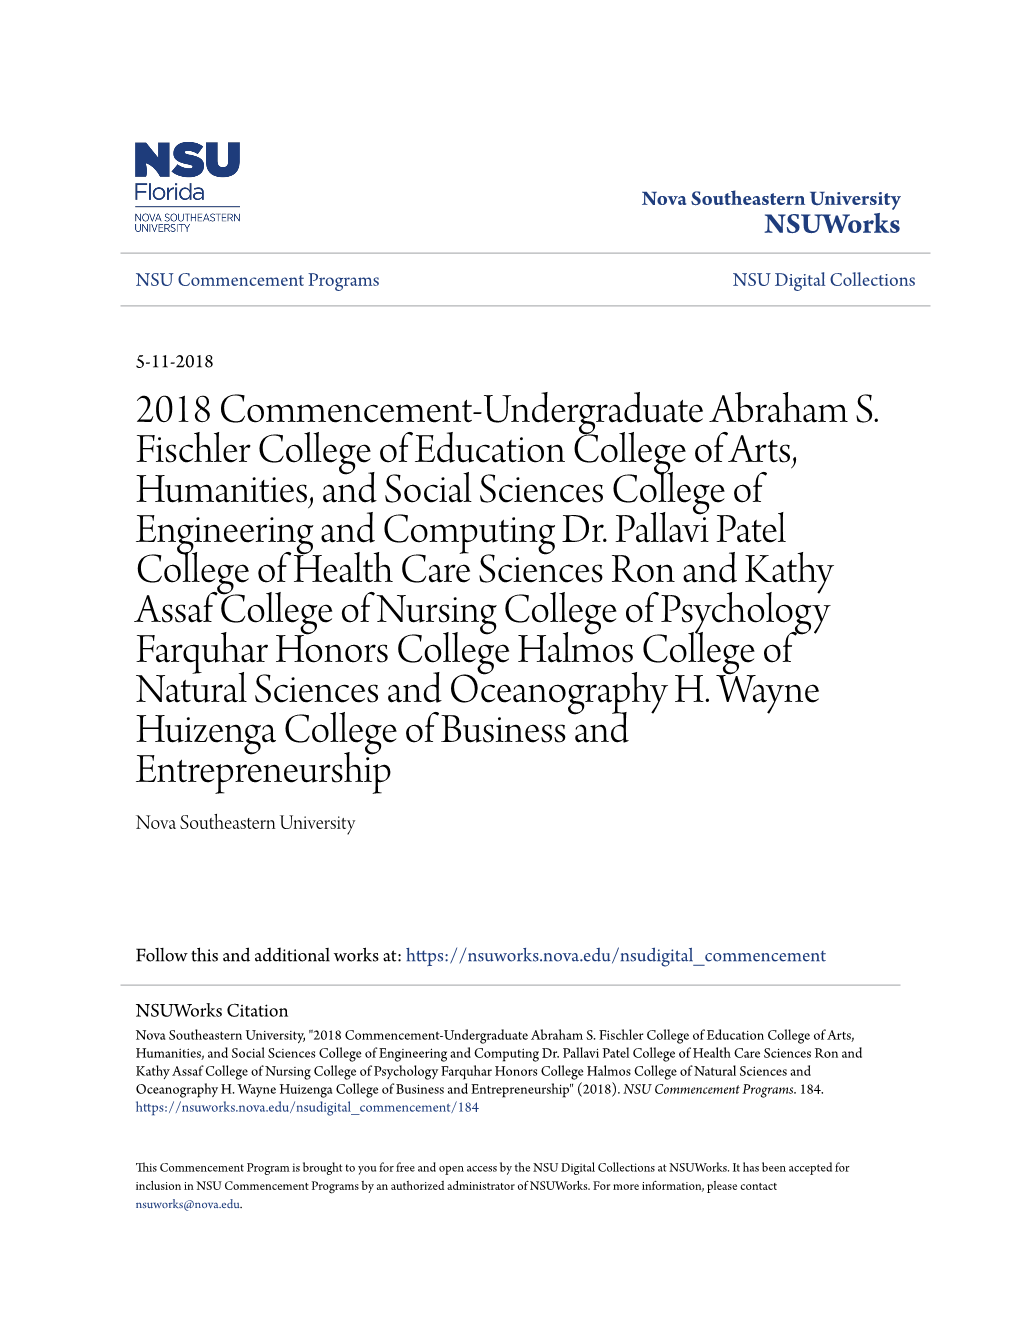 2018 Commencement-Undergraduate Abraham S. Fischler College of Education College of Arts, Humanities, and Social Sciences College of Engineering and Computing Dr